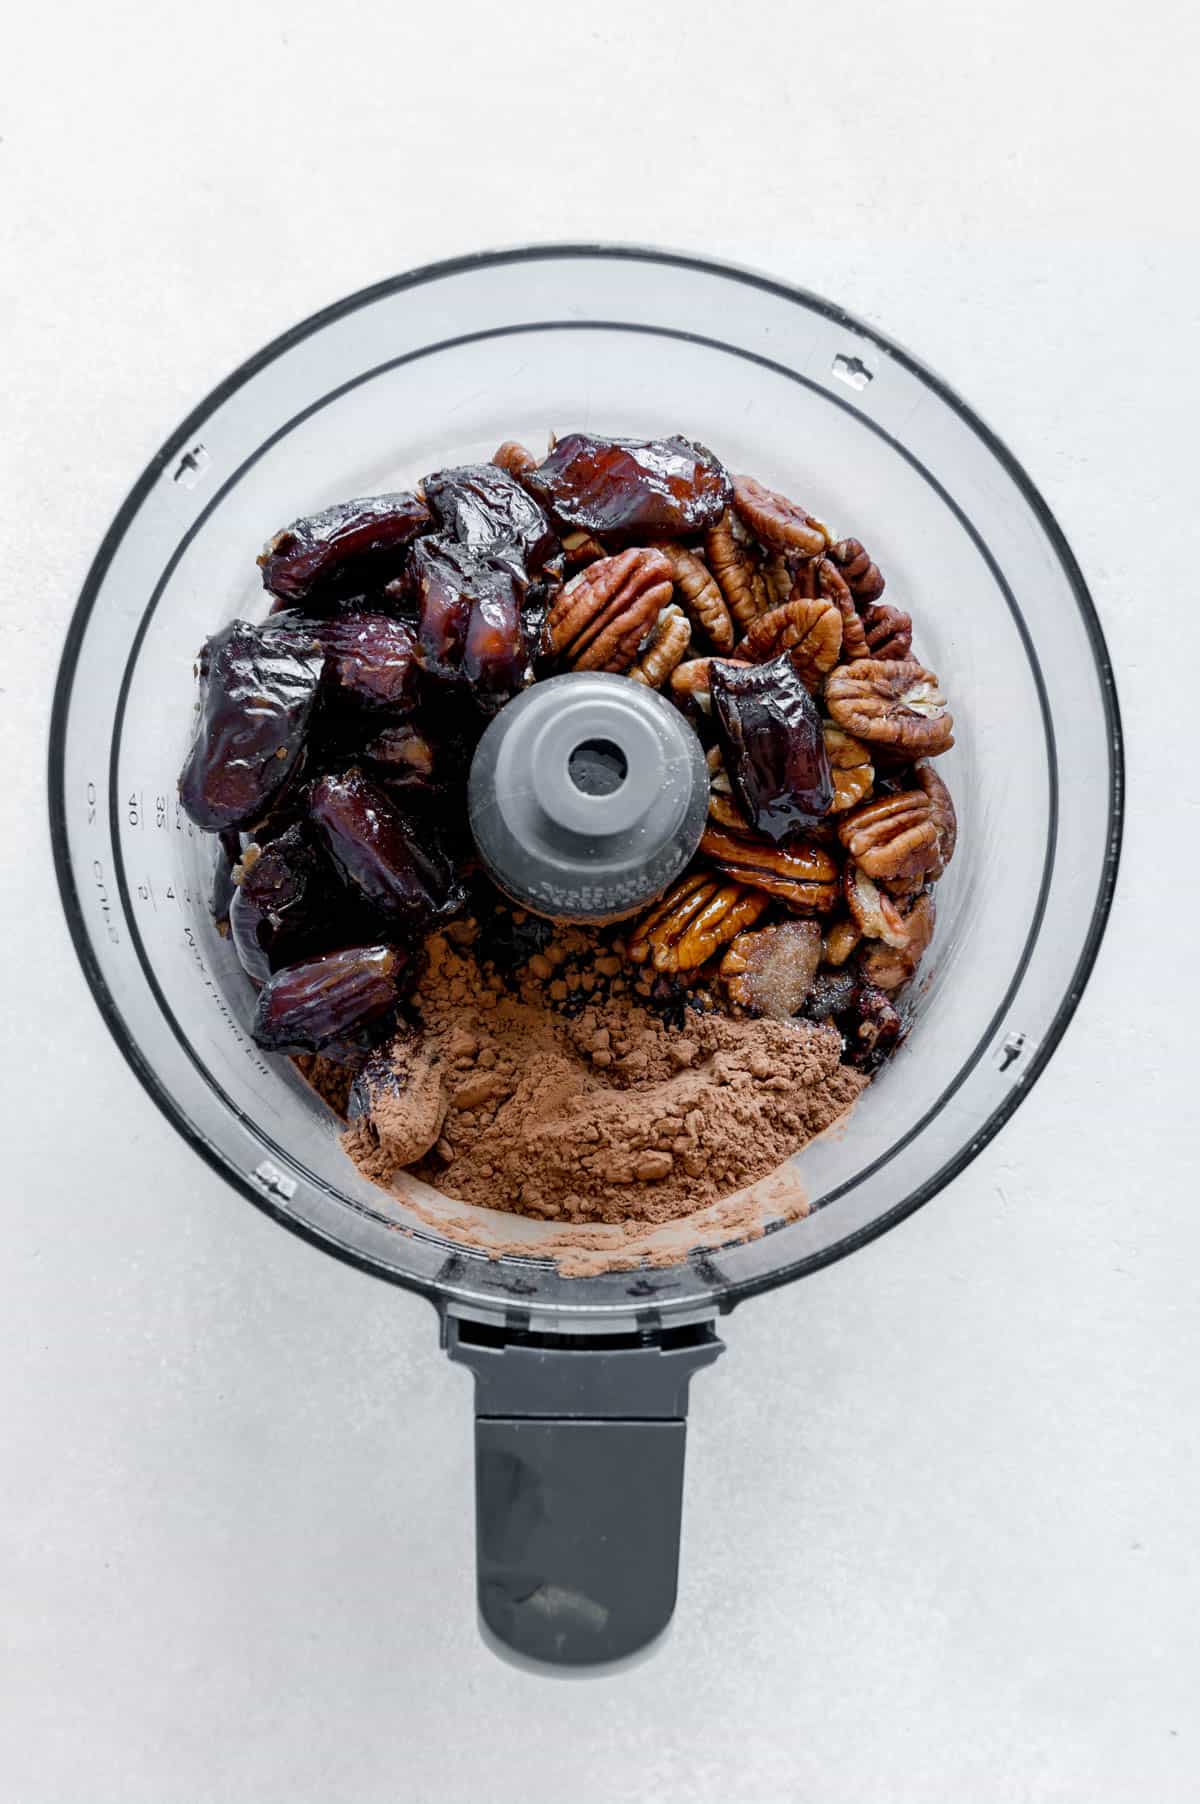 Ingredients for a pecan crust in a food processor.